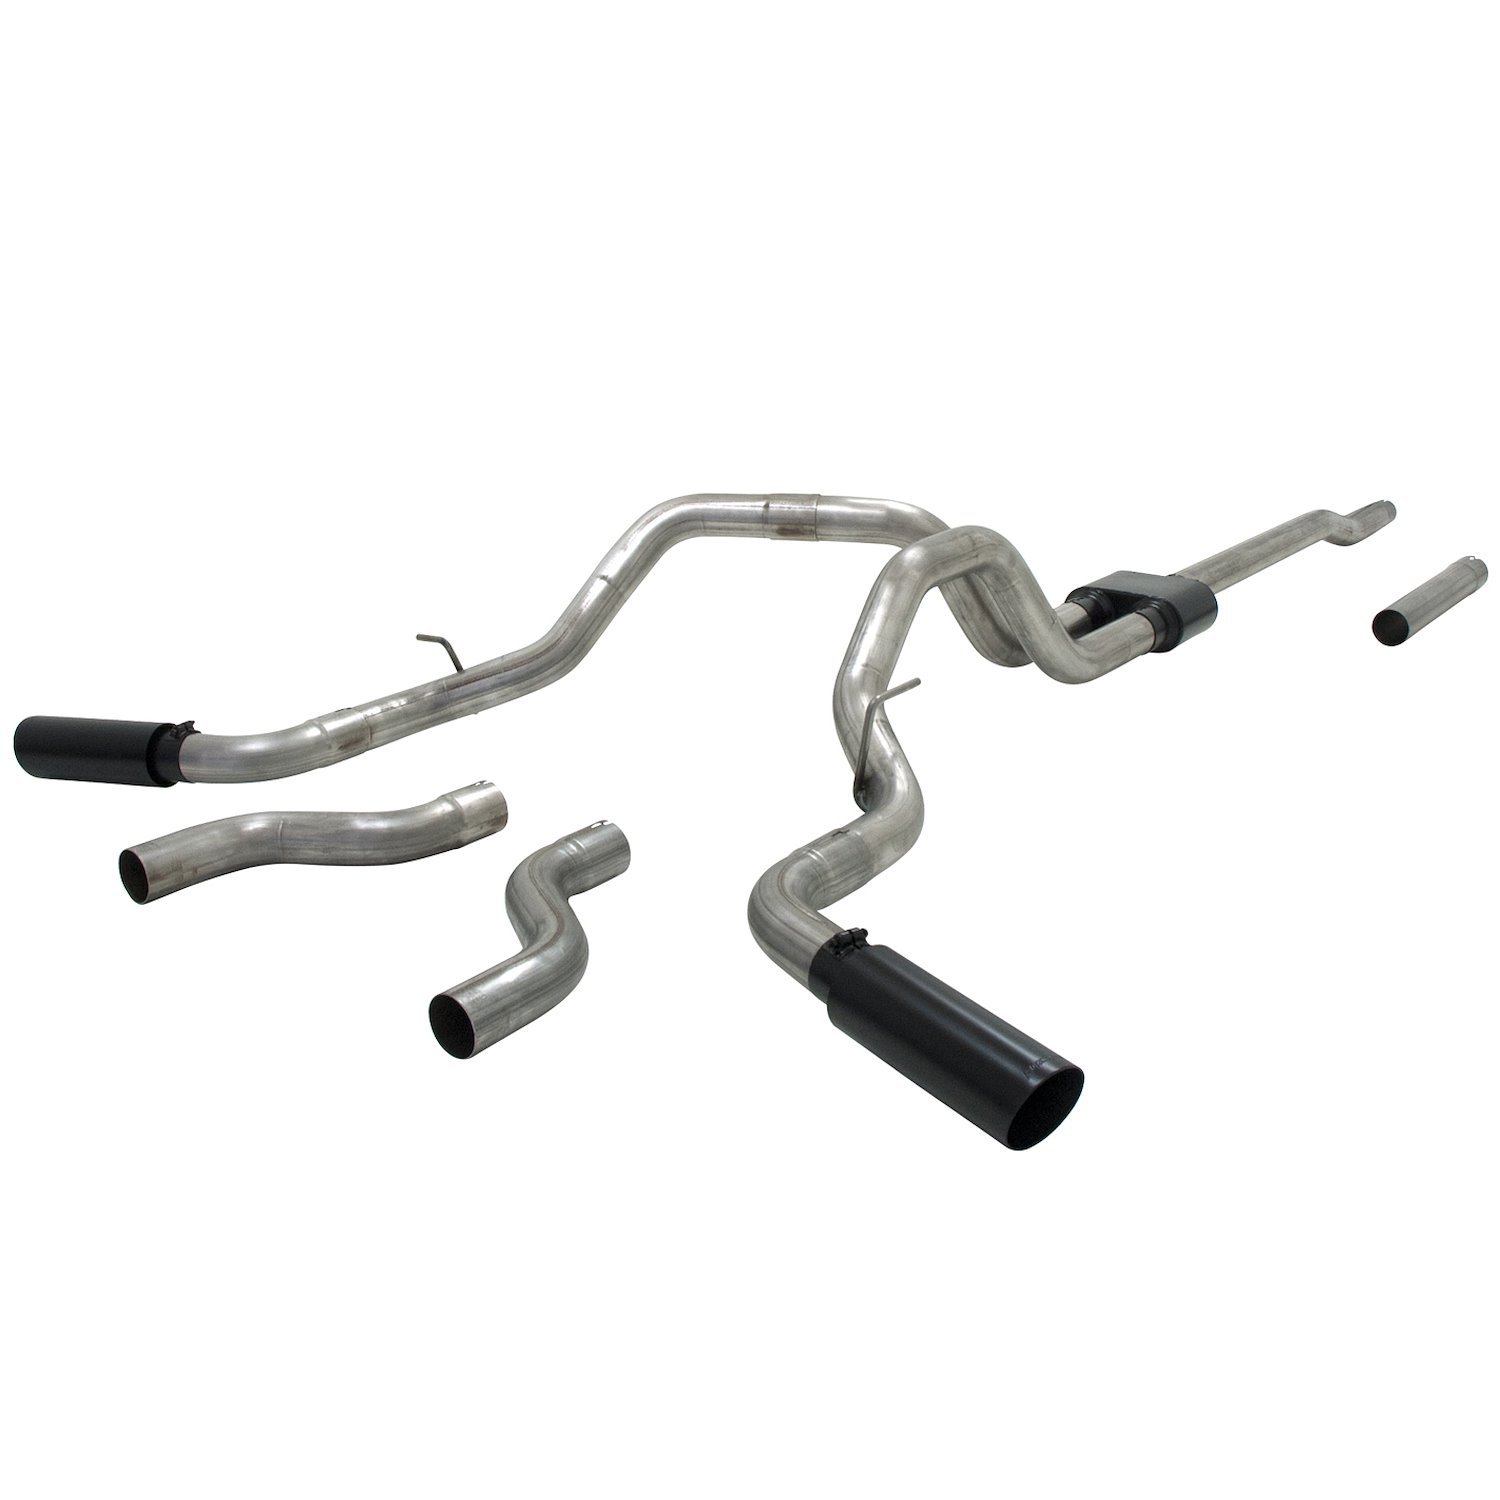 Outlaw Series Cat-Back Exhaust System 2004-2008 Ford F-150 4.6L/5.4L V8